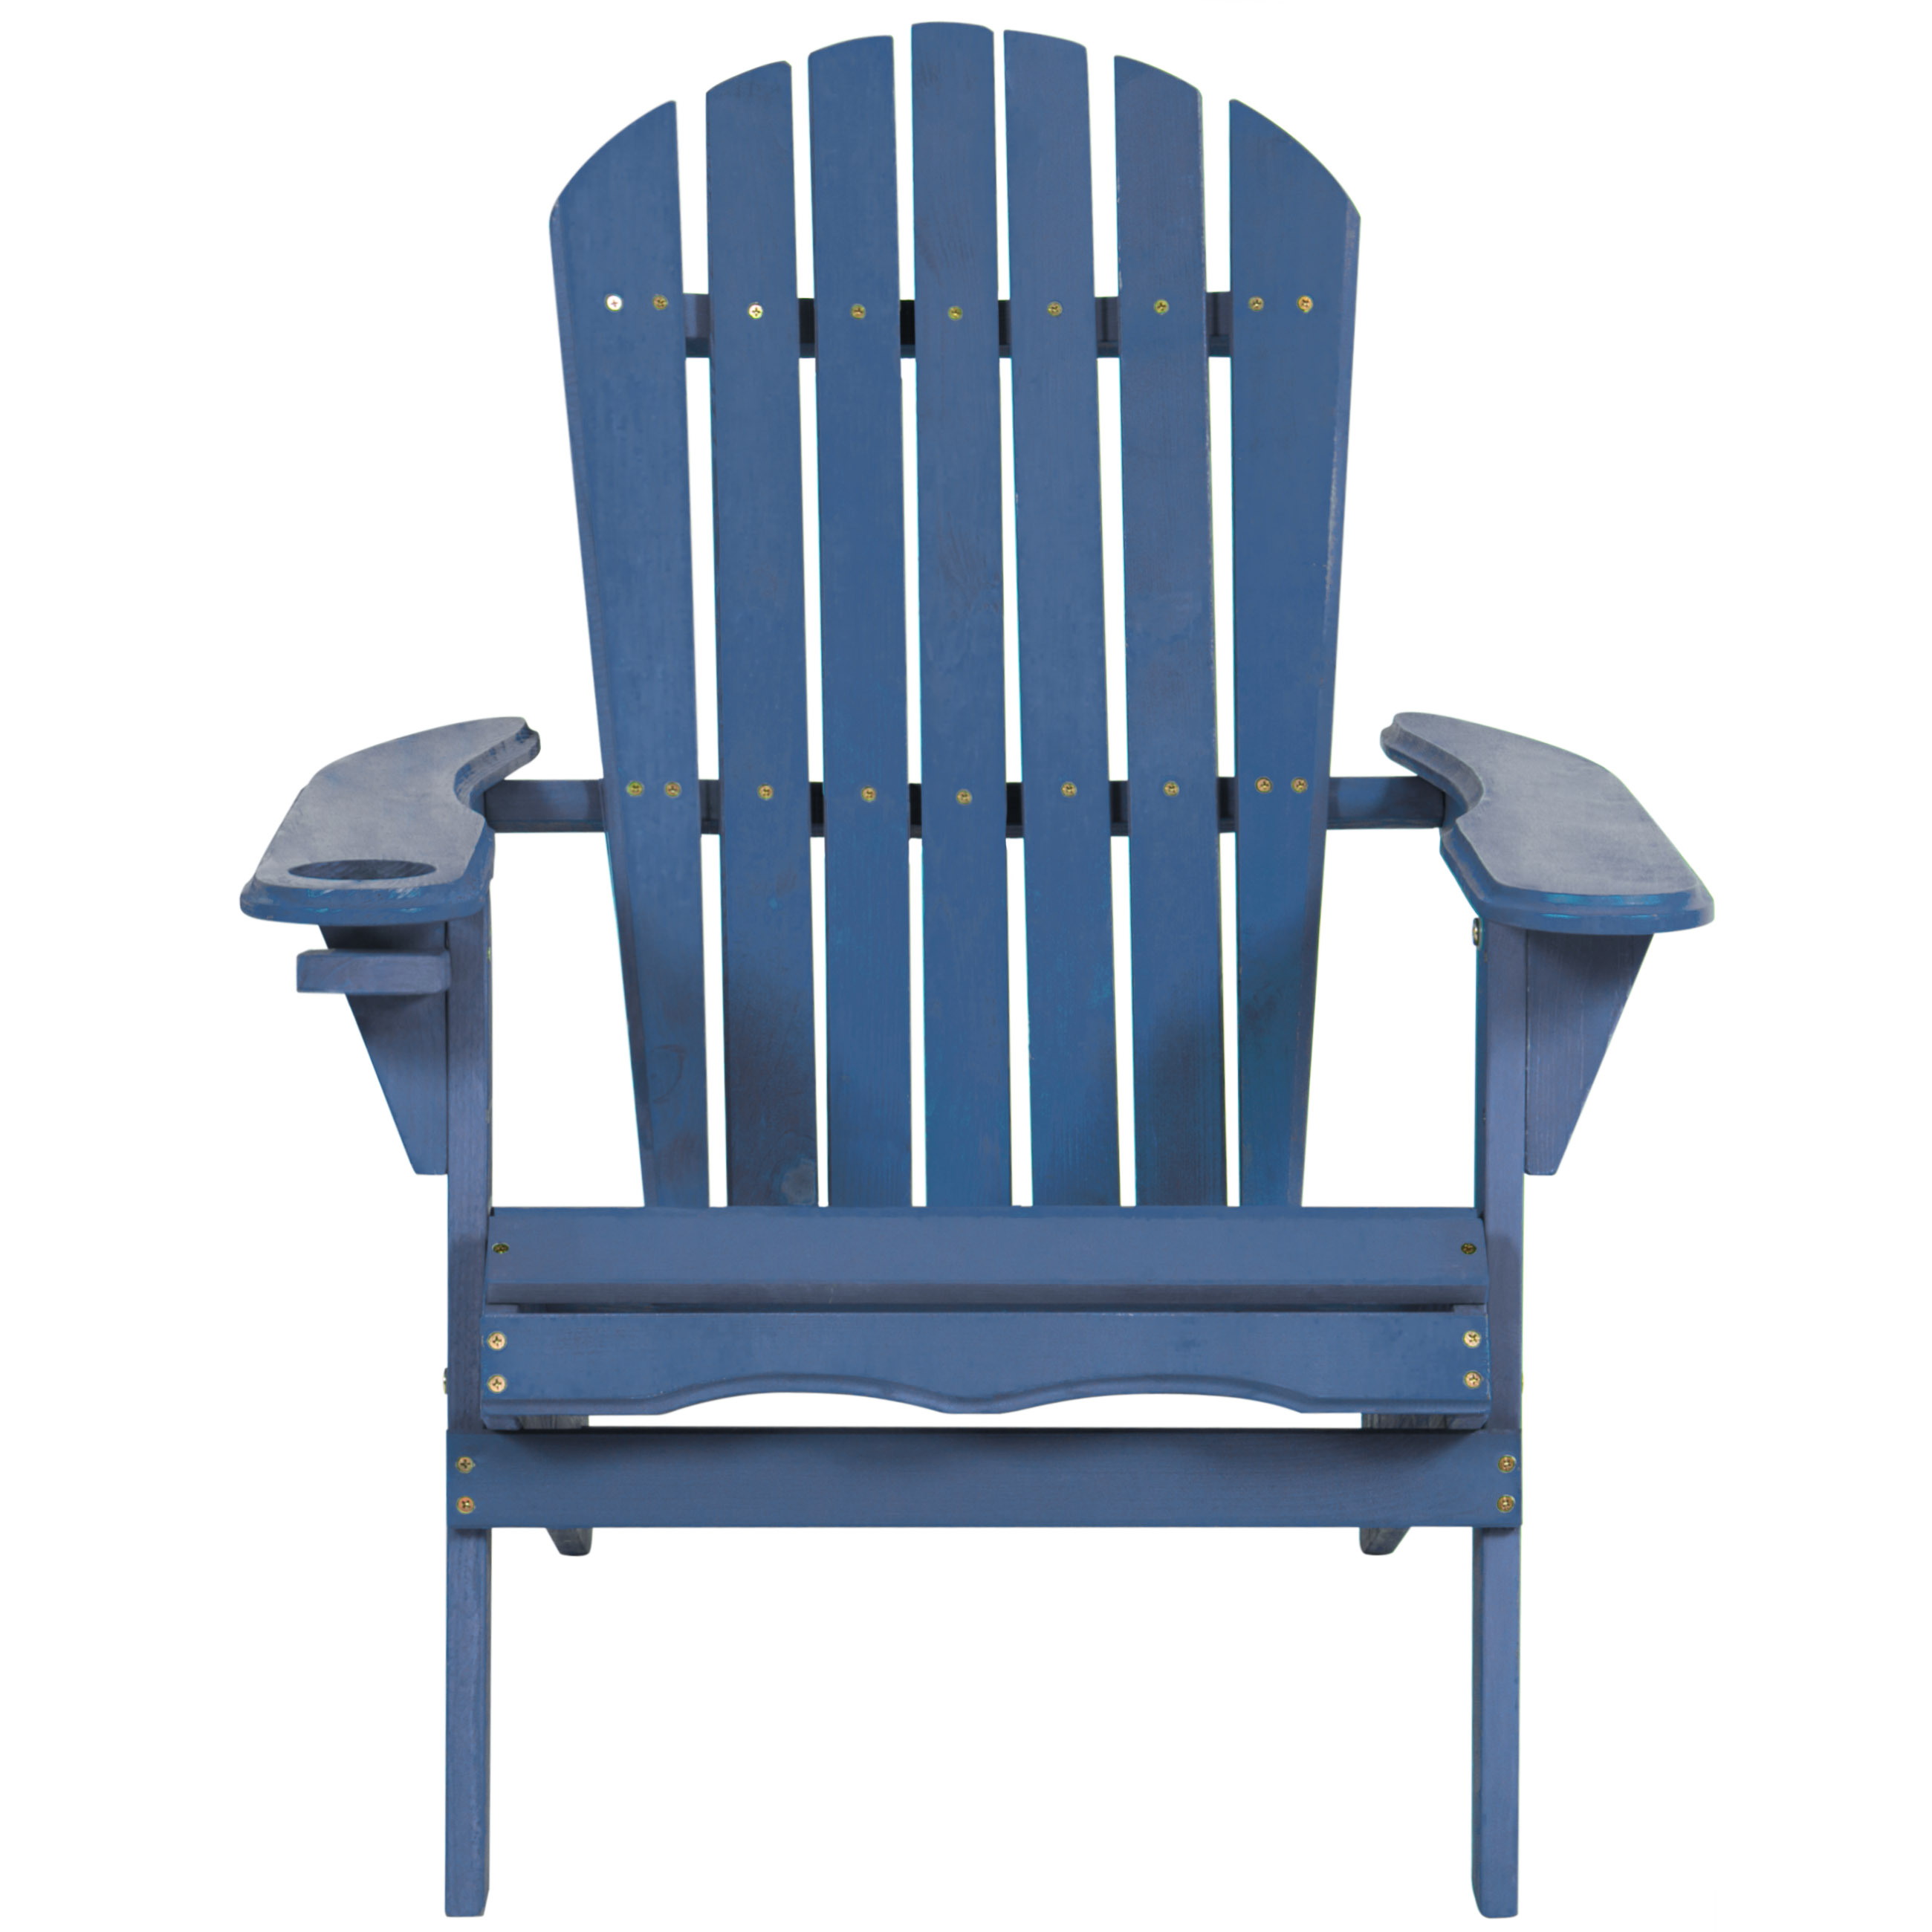 Outdoor Patio Folding Wooden Adirondack Chair W/ Cup